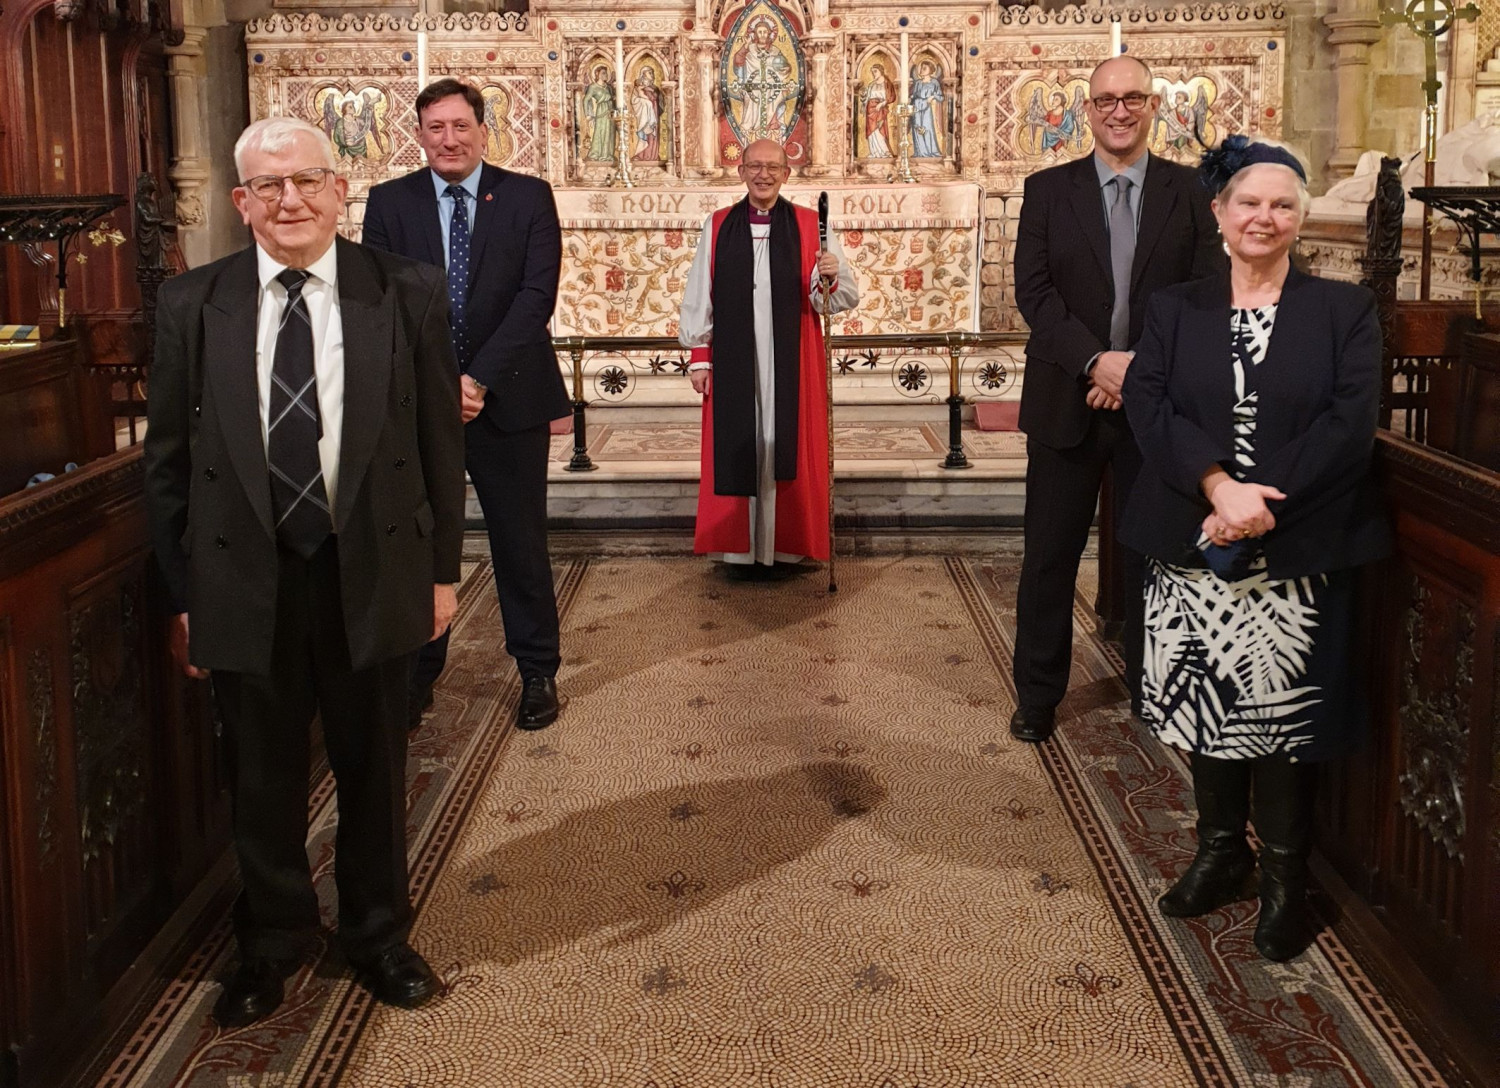 Four new Readers and Bishop Mark Ashcroft